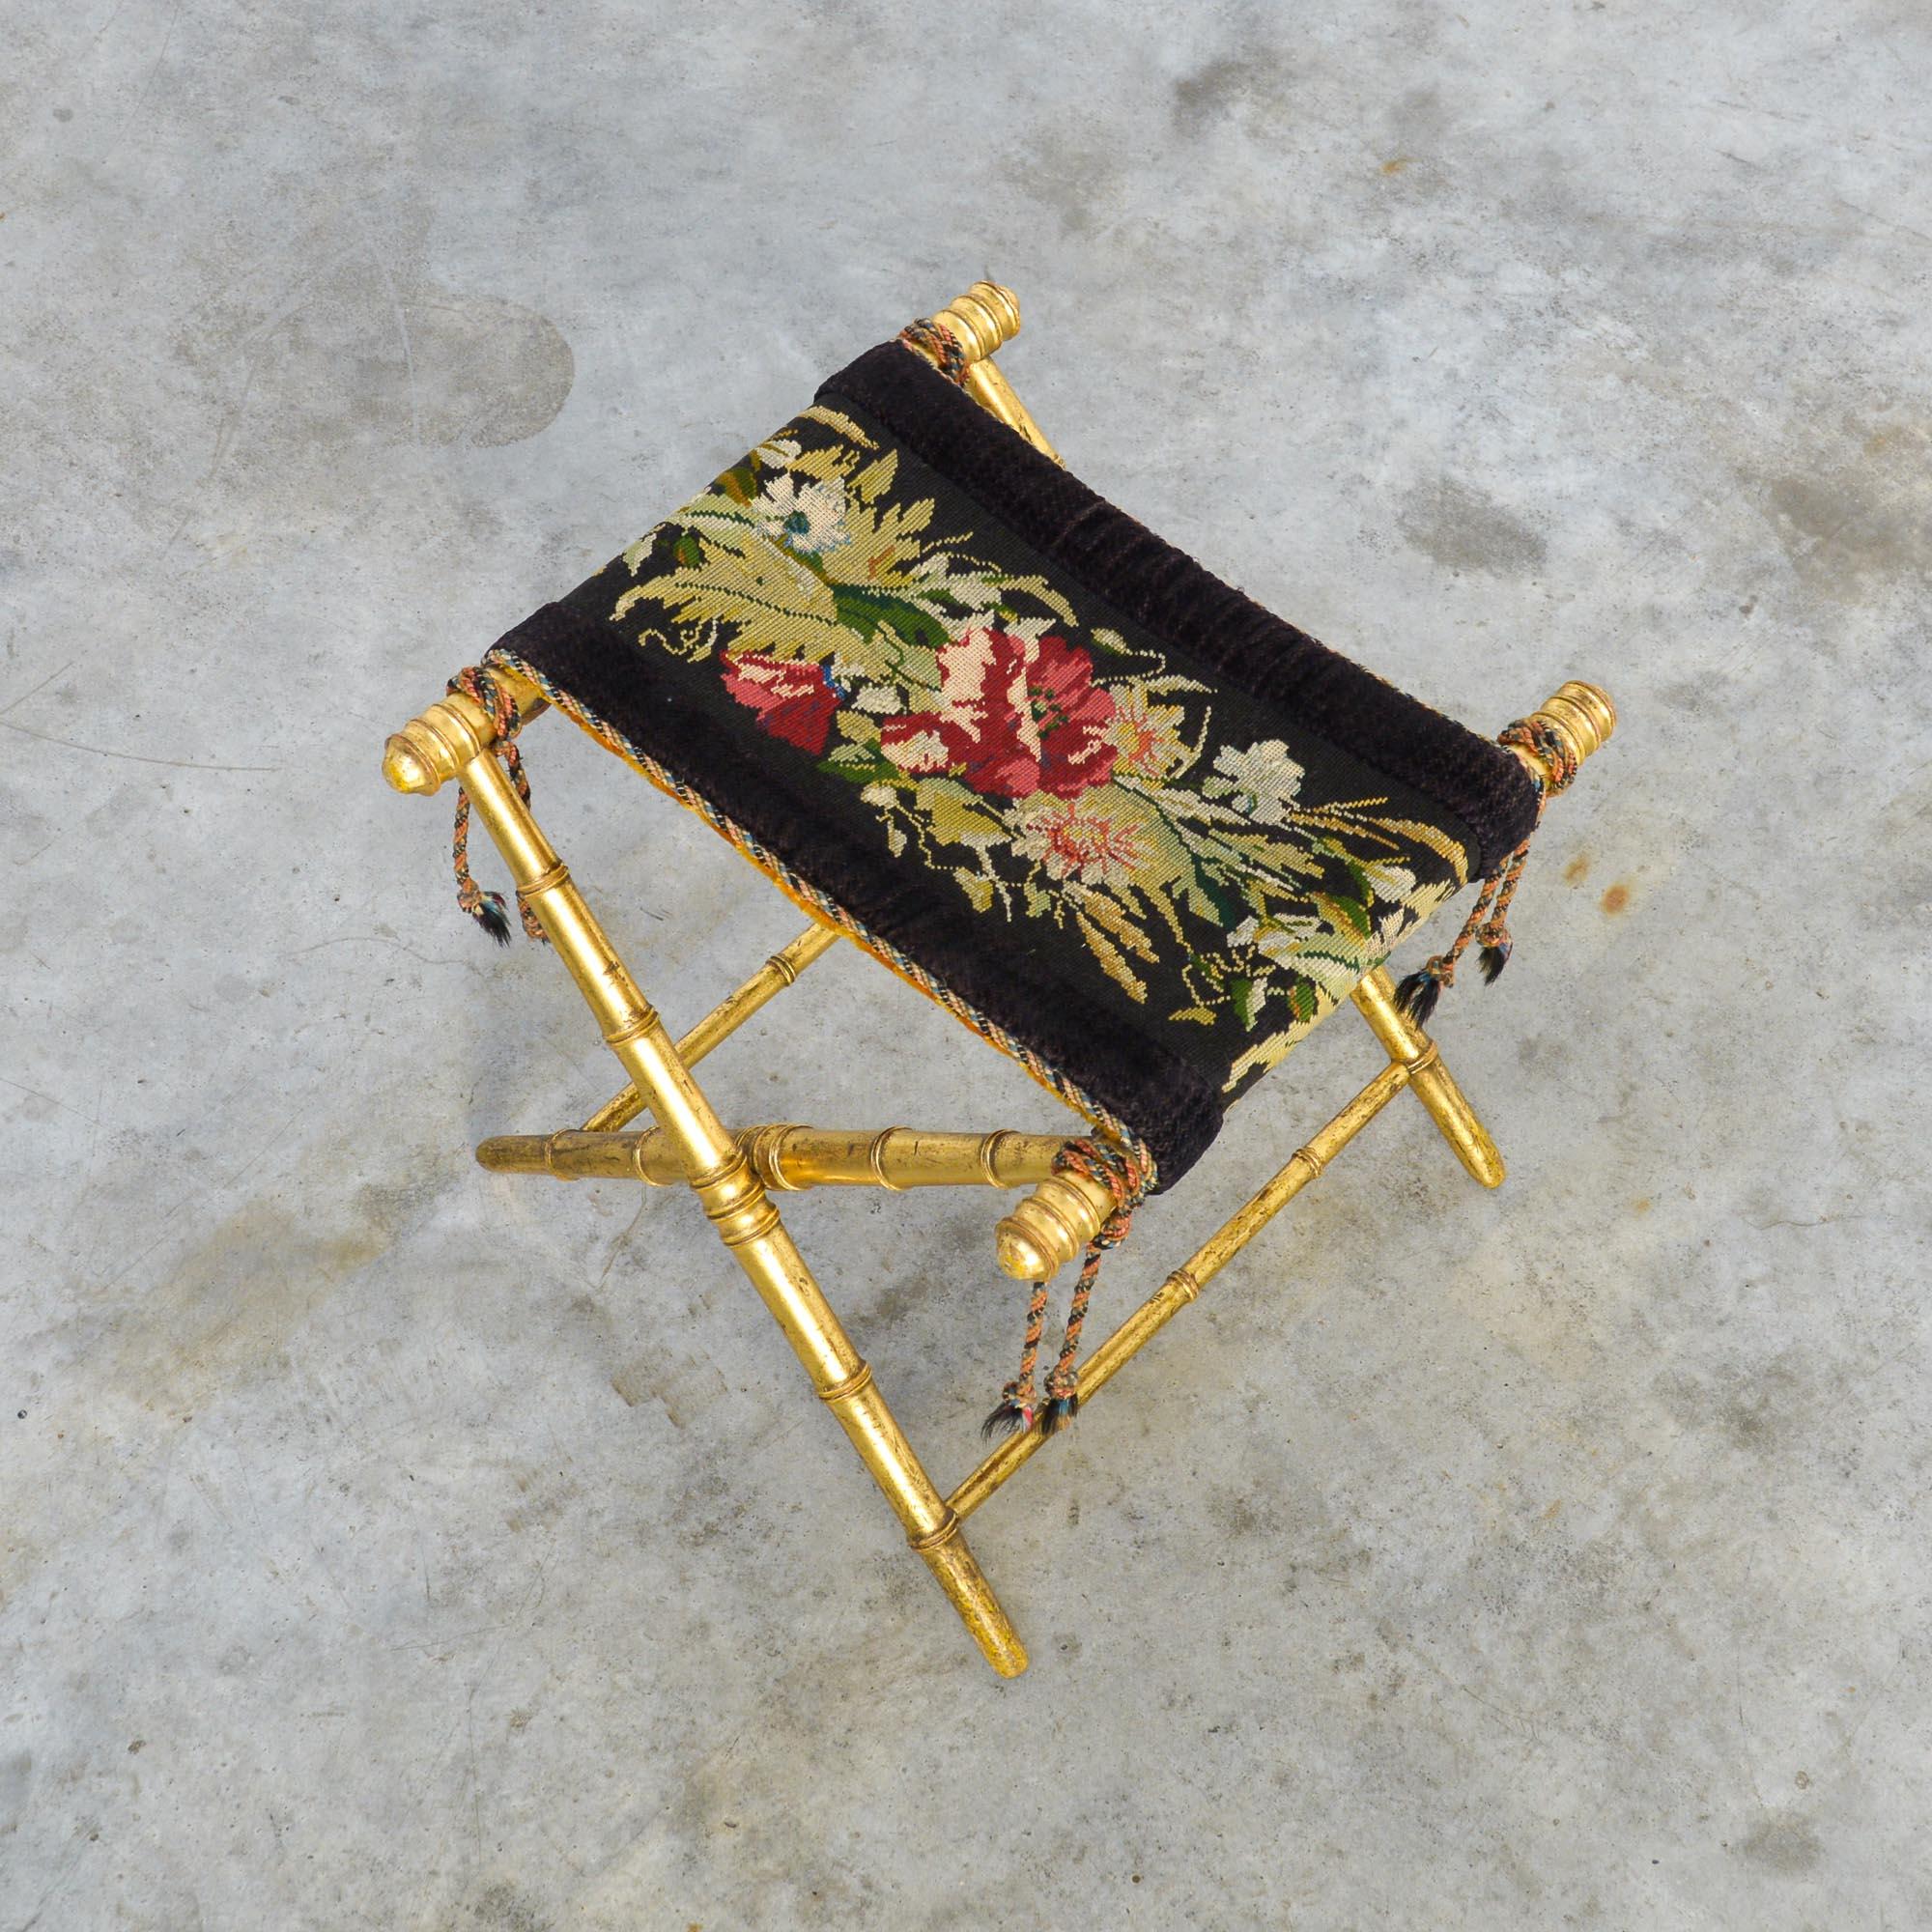 Love at first sight!
This decorative Napoleon III folding stool dates from circa 1850.
It is an elegant low stool with a gilt wooden faux bamboo folding base. The seat still has its authentic embroidery finished with velvet.
This extraordinary